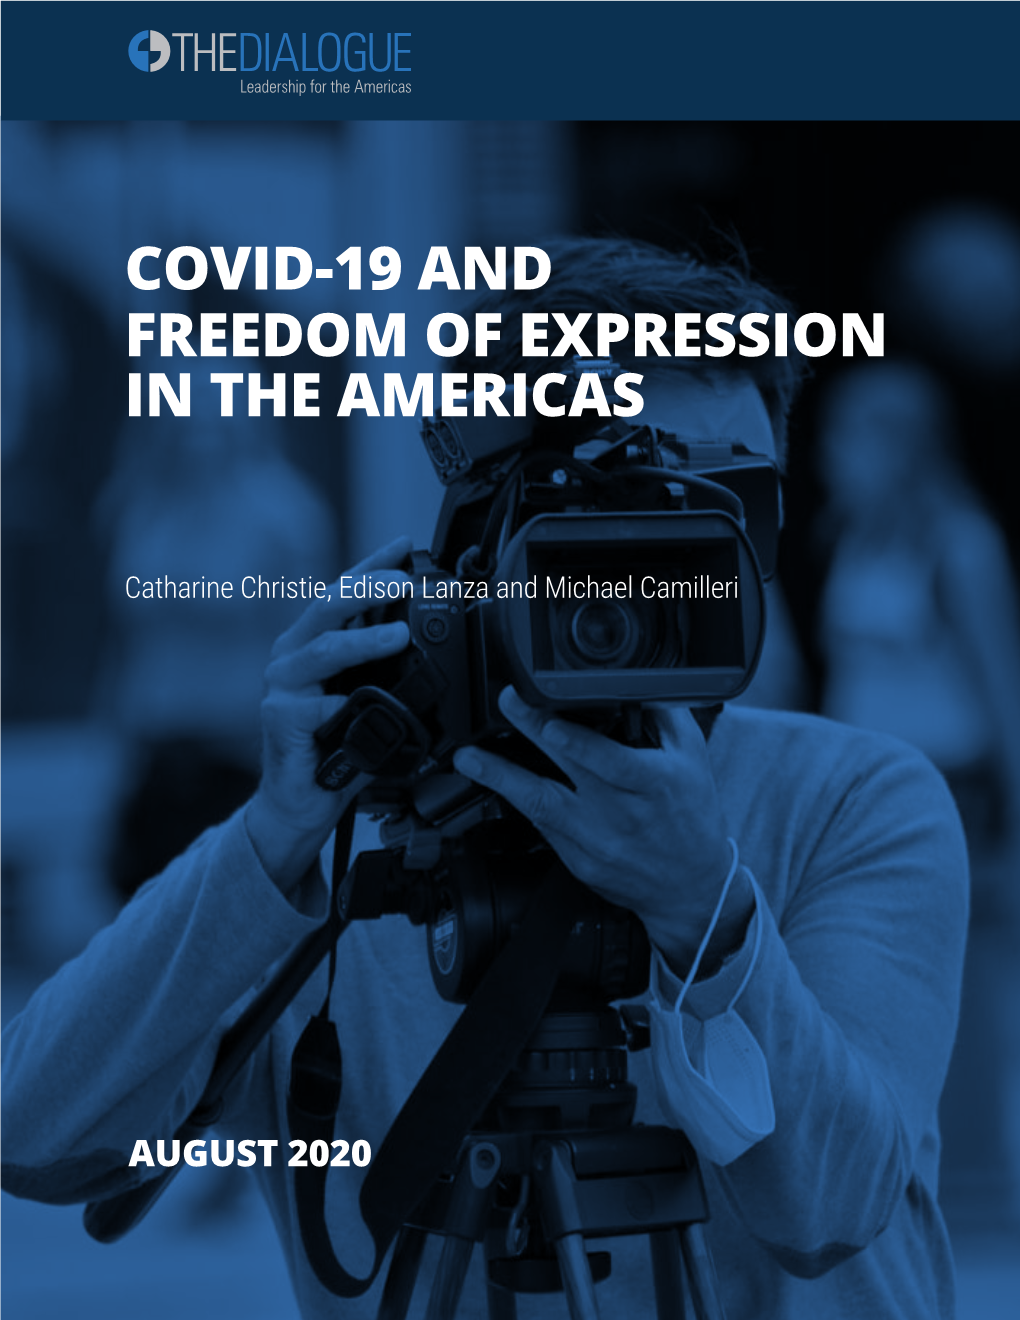 Covid-19 and Freedom of Expression in the Americas